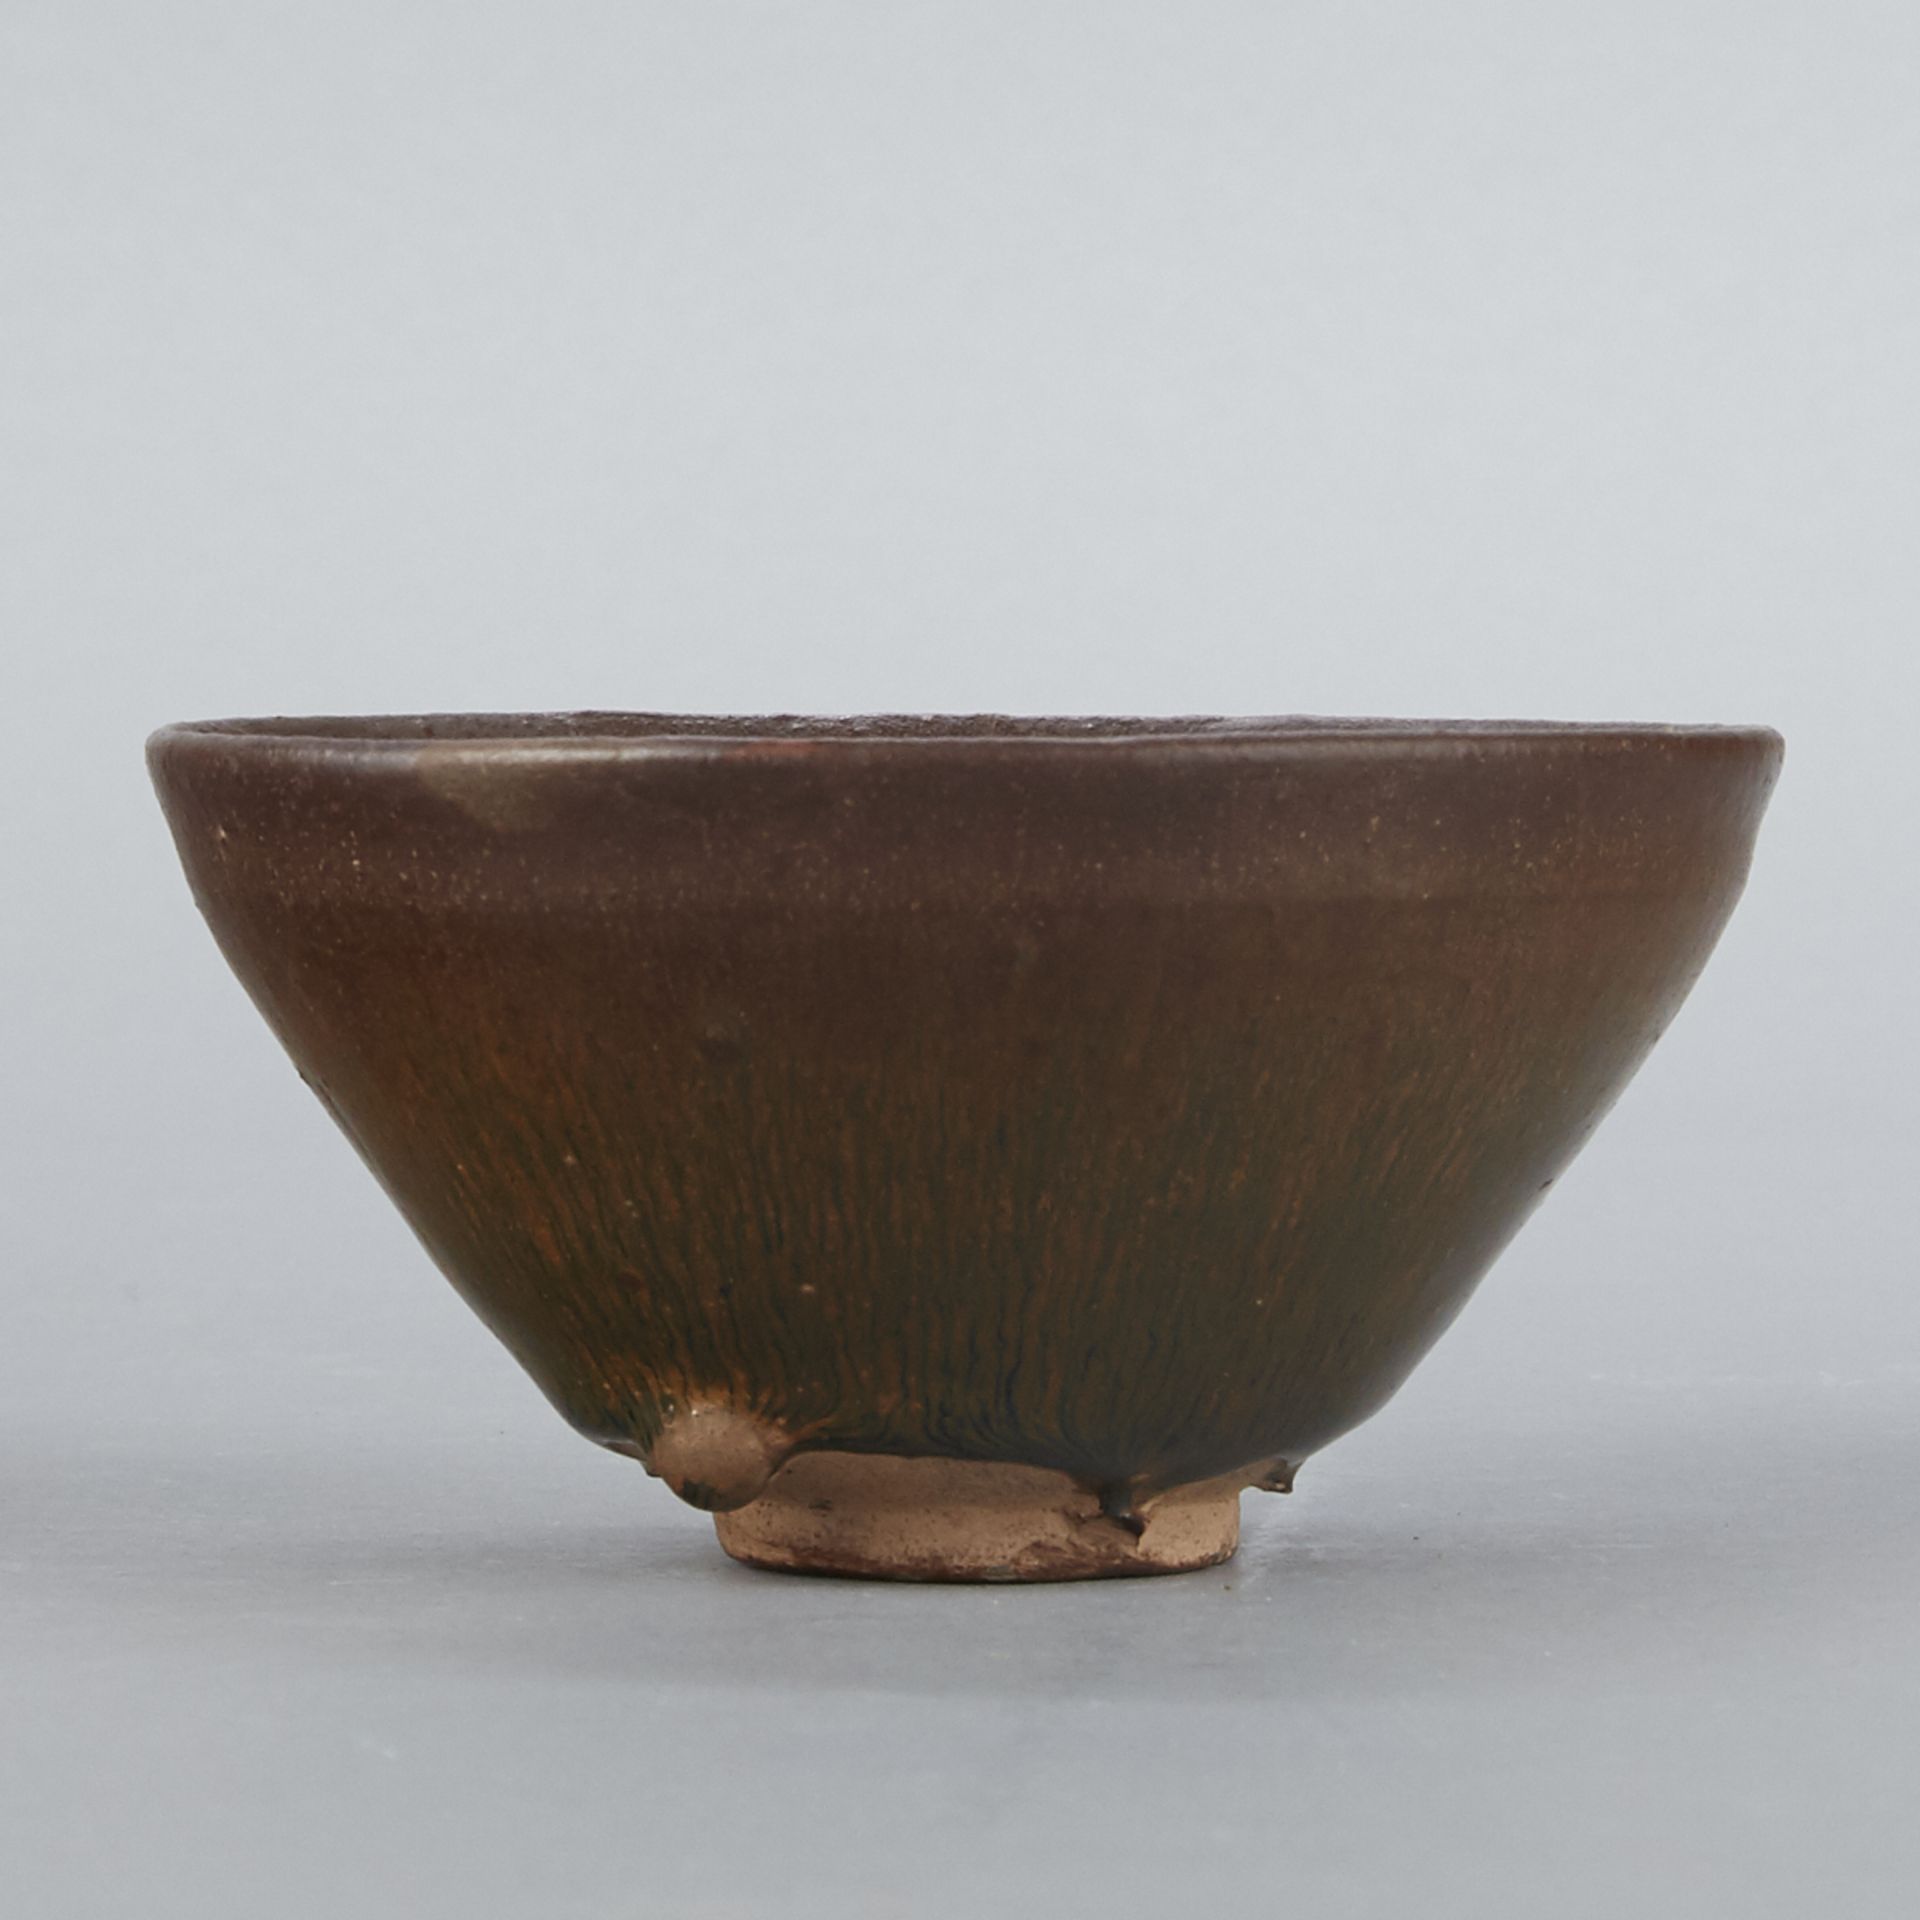 Early Chinese Jian Hare's Fur Bowl - Image 3 of 5